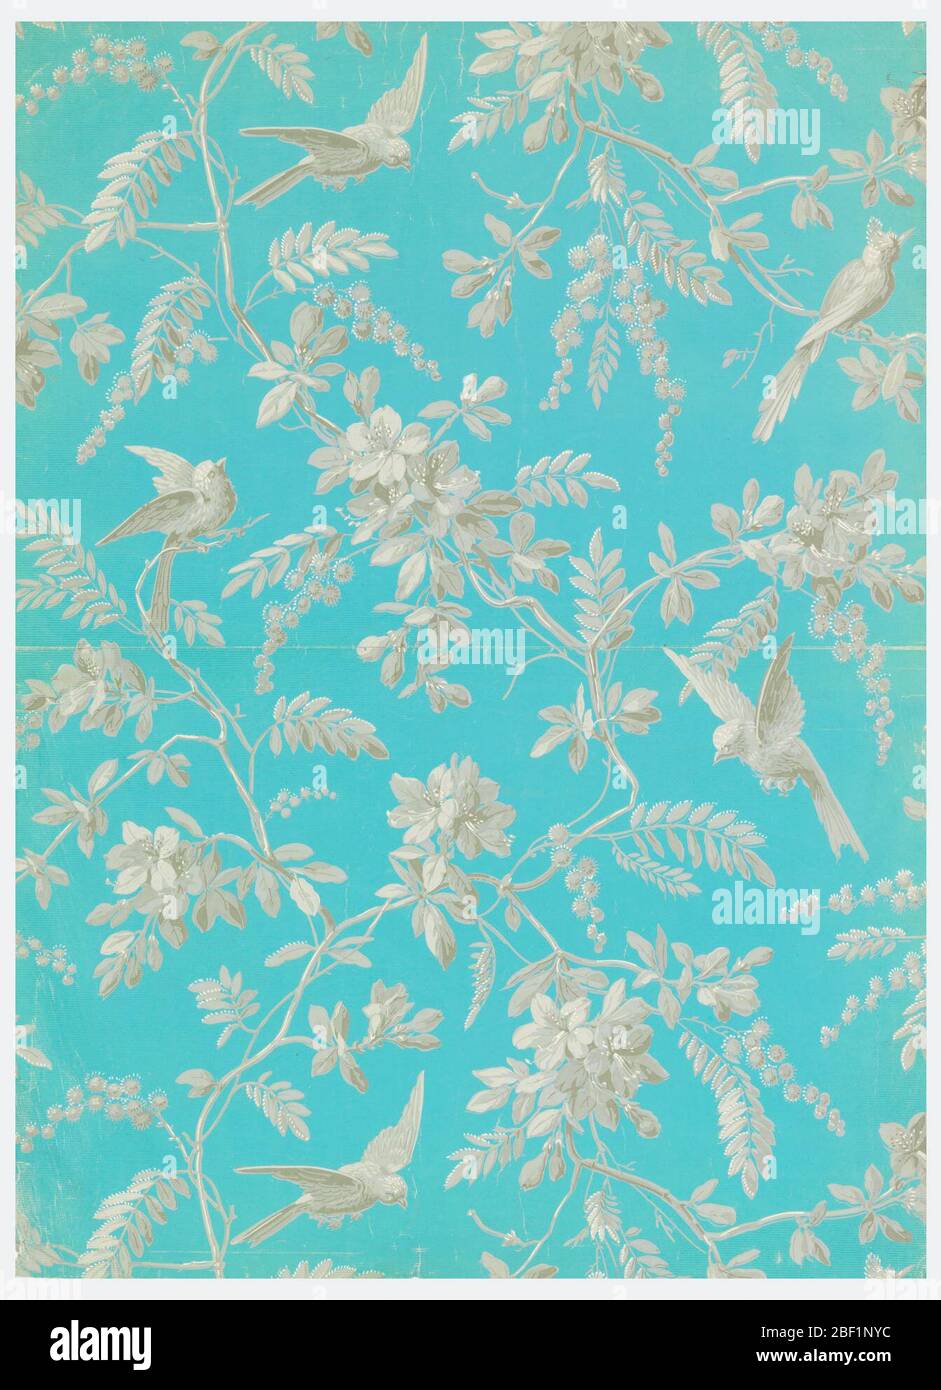 Sidewall. End of a roll, giving complete width. Long-tailed birds, in flight and perched on slender branching stems bearing small leaves, flowers and stalks of seed pods. Printed in gray and white on blue ribbed ground. Stock Photo